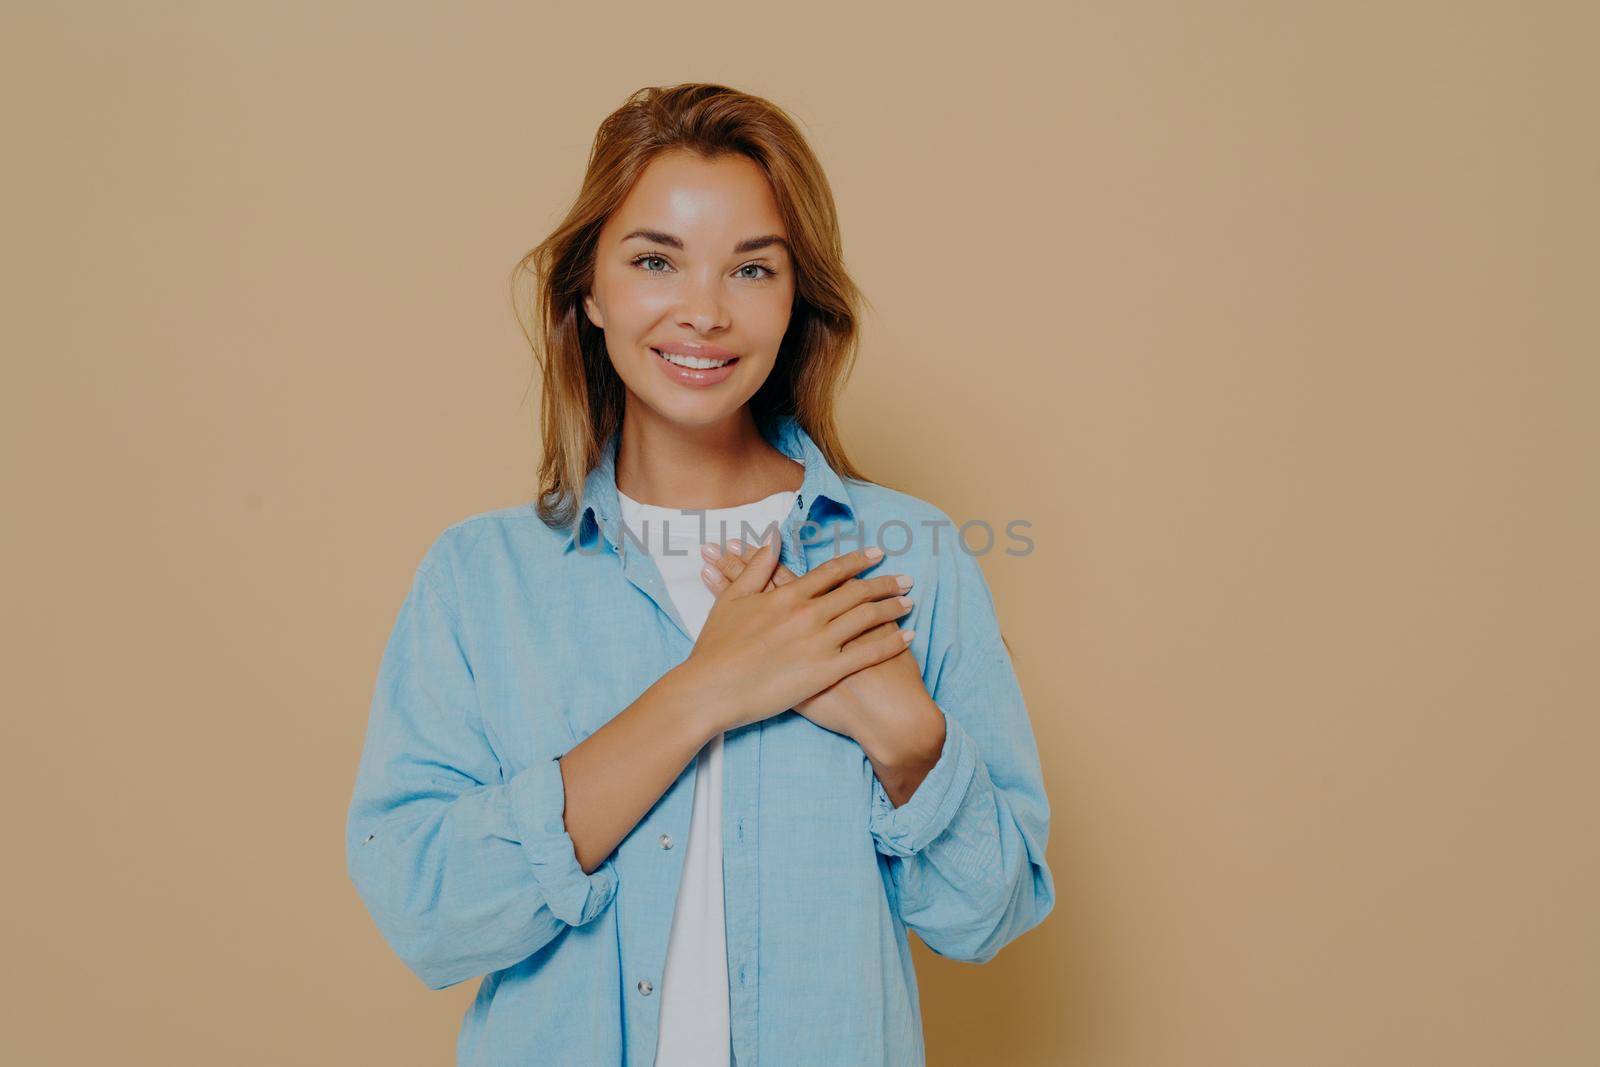 Delighted beautiful woman demonstrating her touched lovely mood by holding hands near heart, looking at camera with love and gratitude while posing in casual outfit on beige background